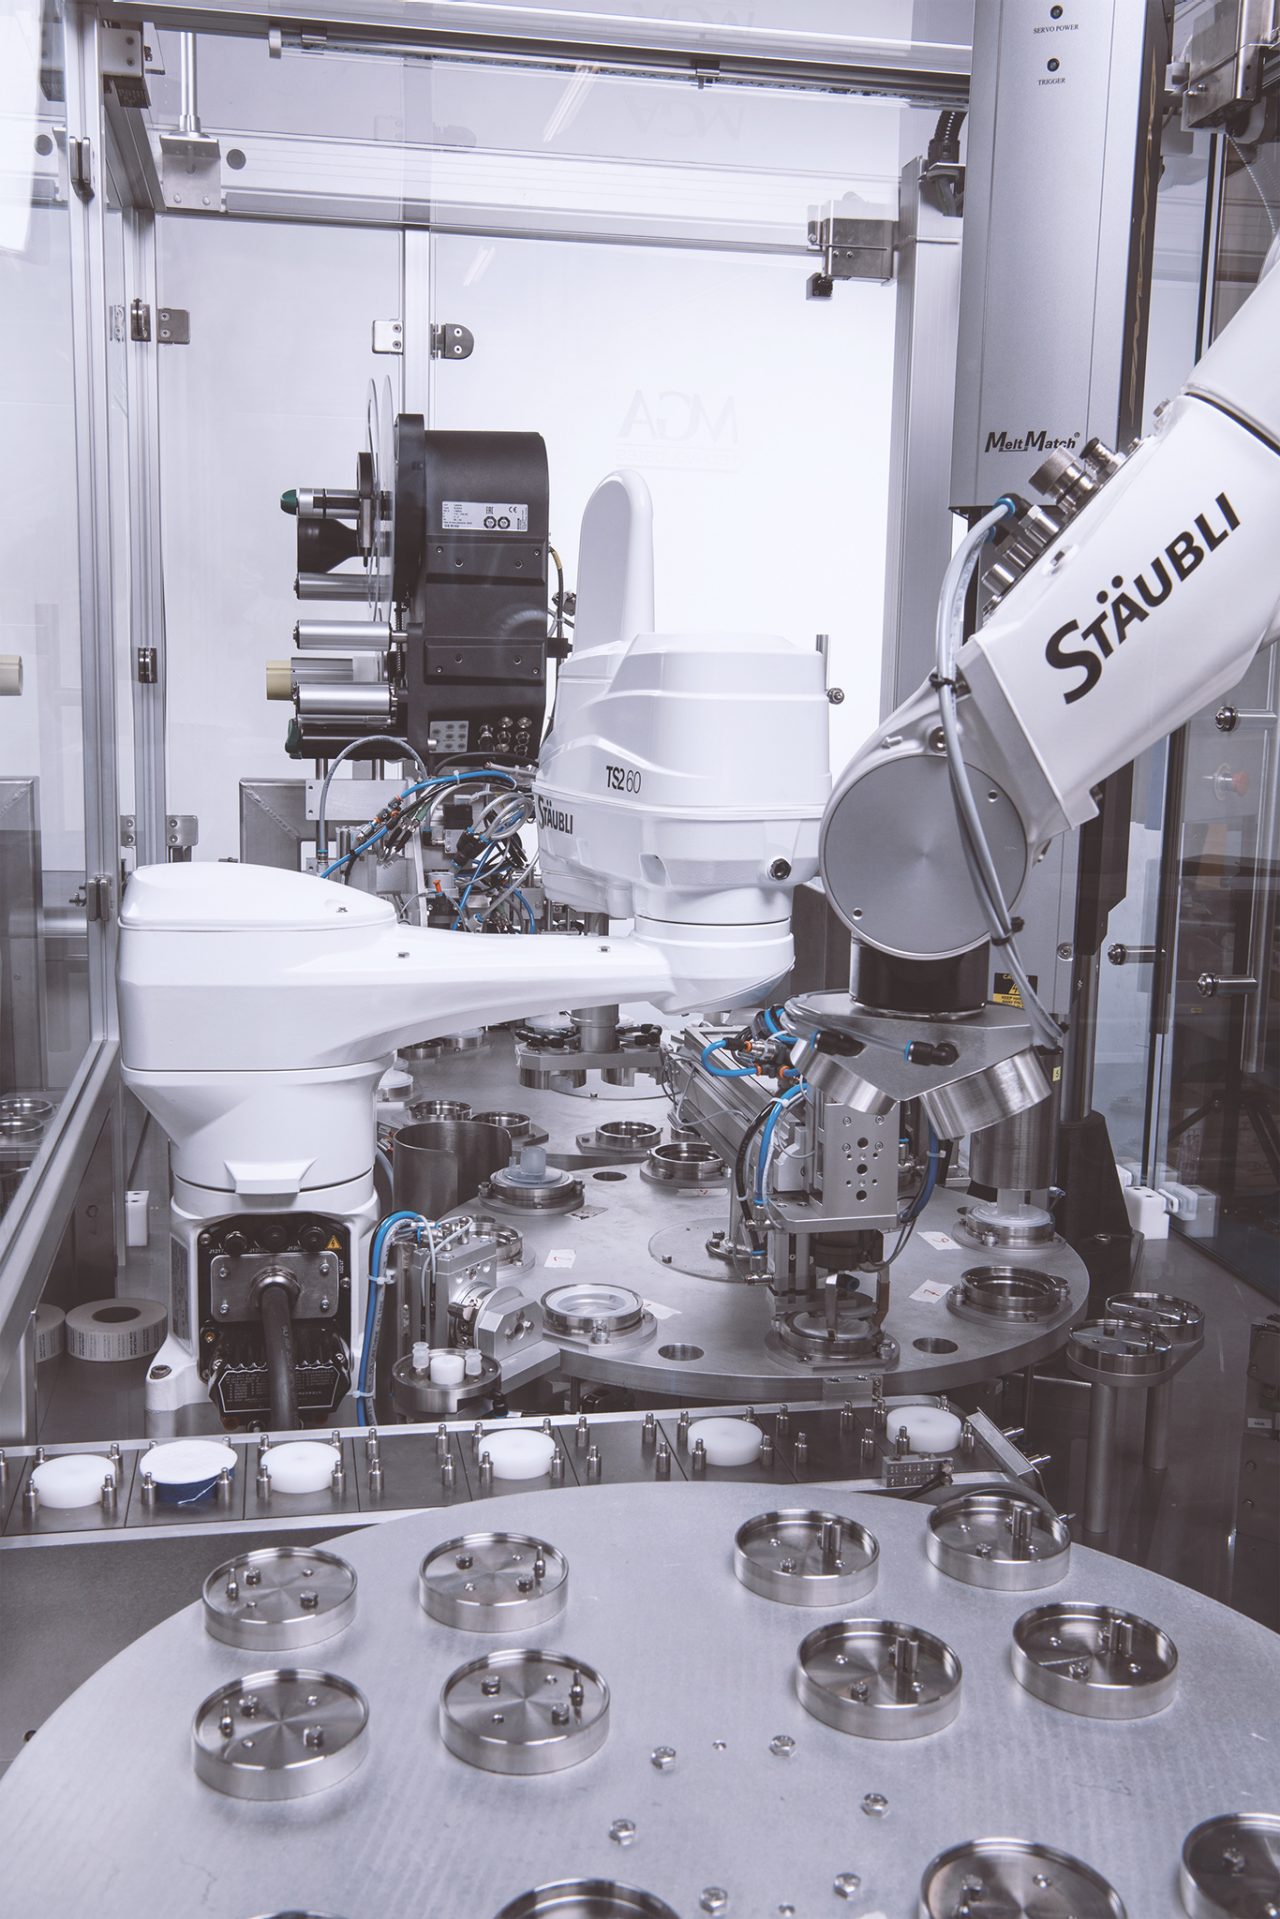 Stäubli was able to provide the two cleanroom robots for the cell for medical device manufacturing